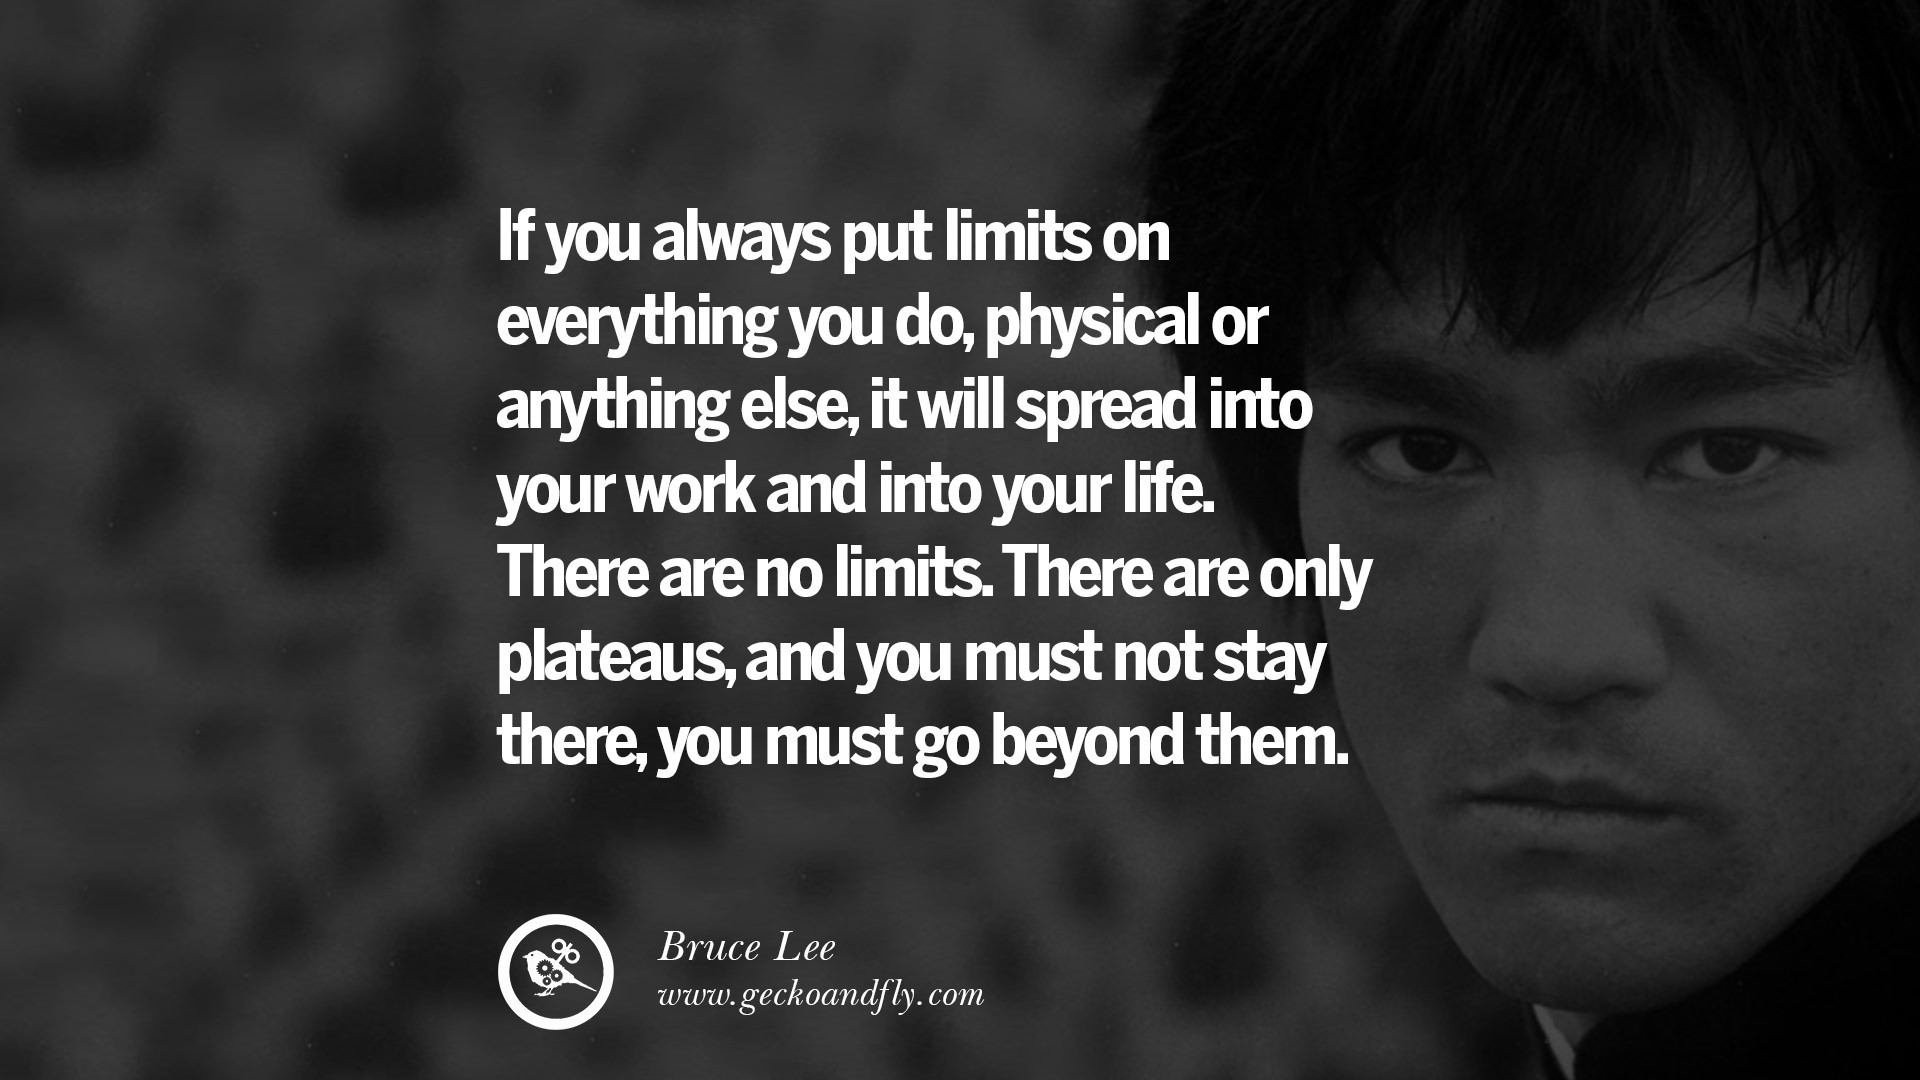 Bruce Lee Motivational Quote
 25 Inspirational Quotes from Bruce Lee s Martial Arts Movie